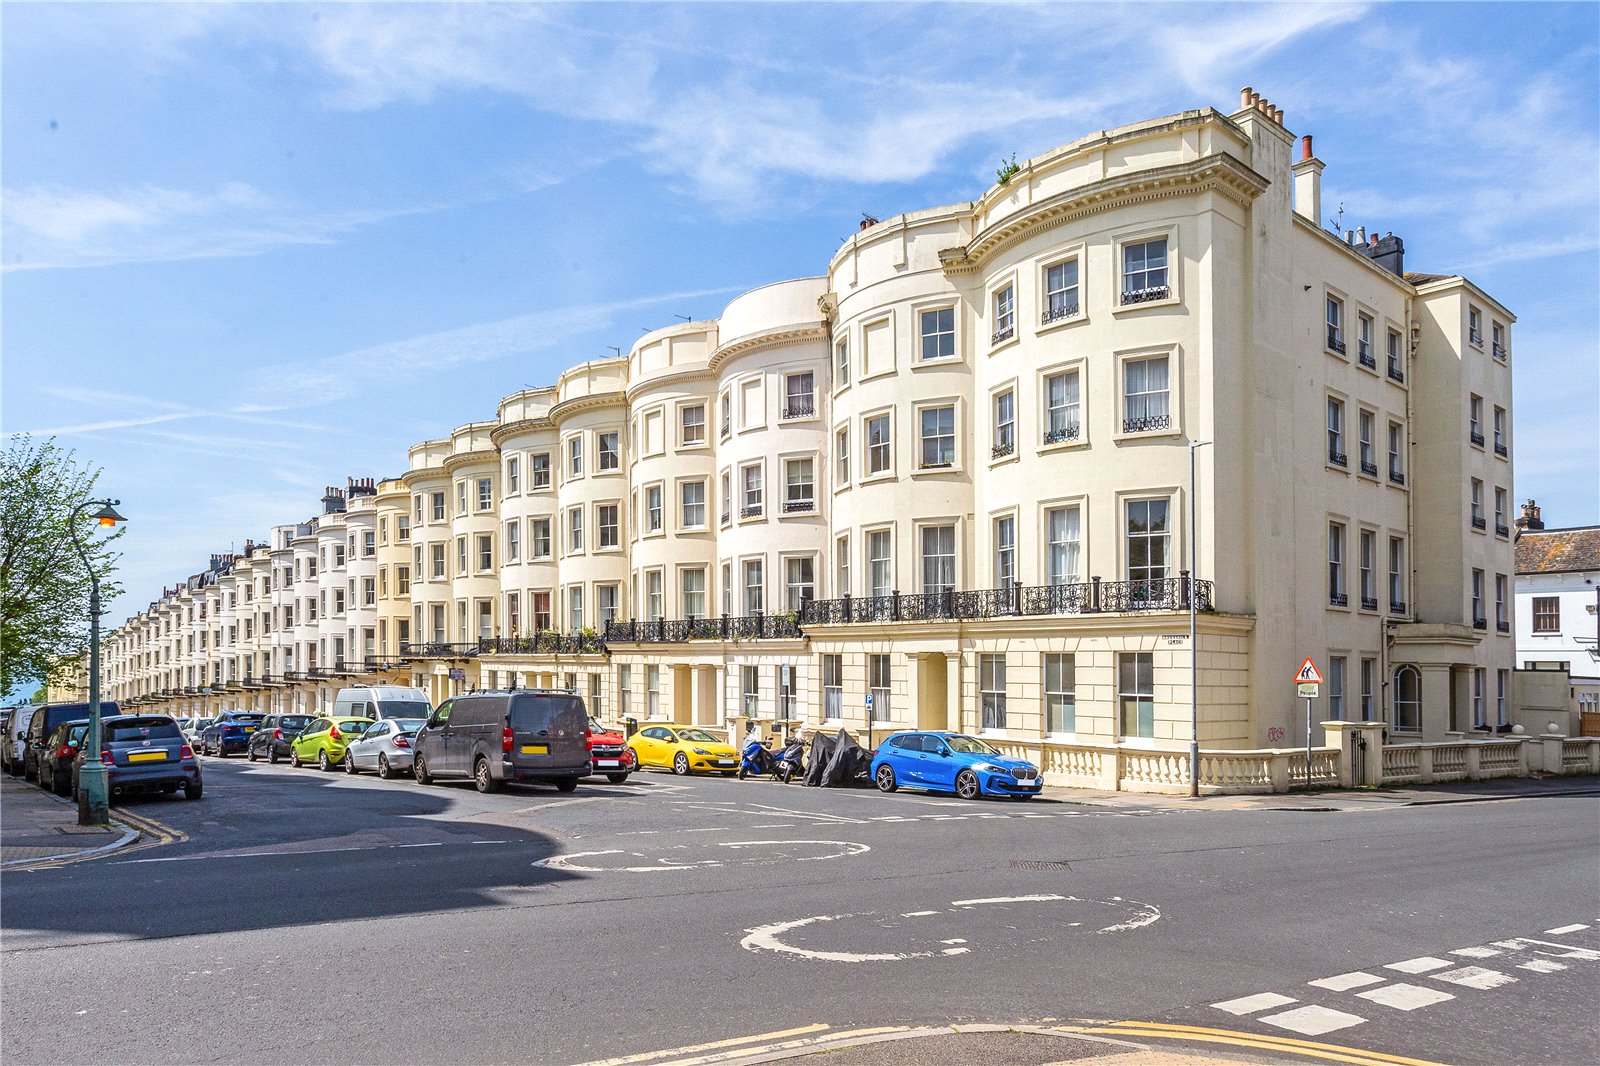 Brunswick Place, Hove, East Sussex, BN3